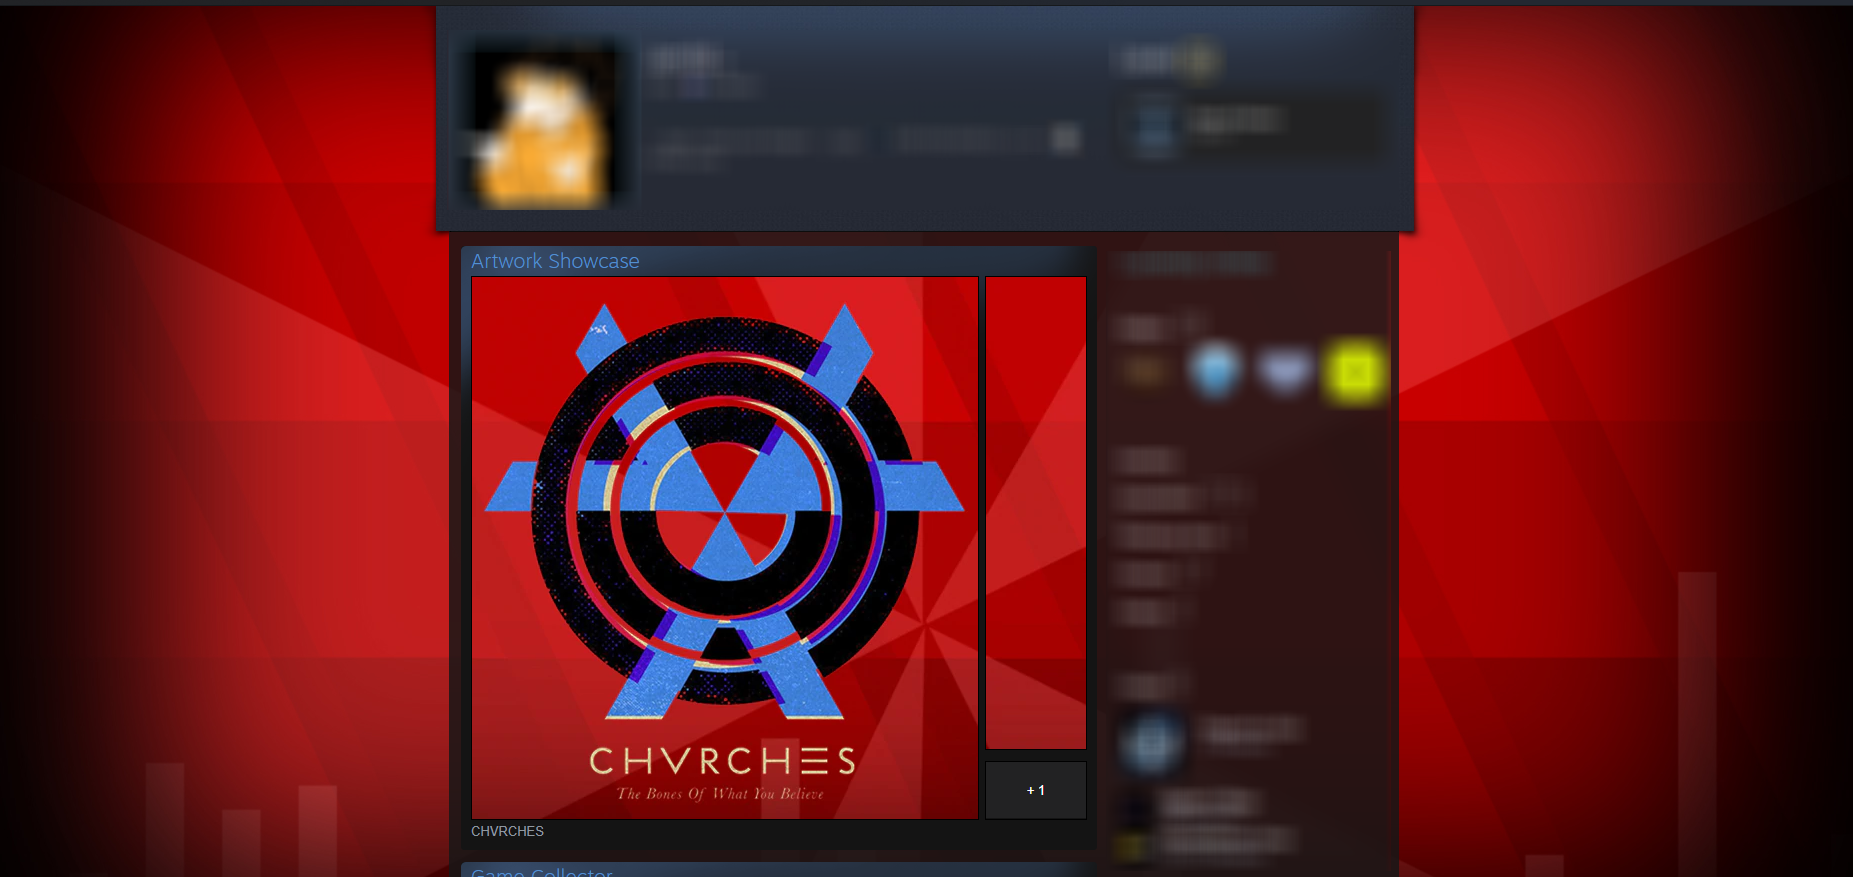 Chvrches Tbowyb Steam Profile Background